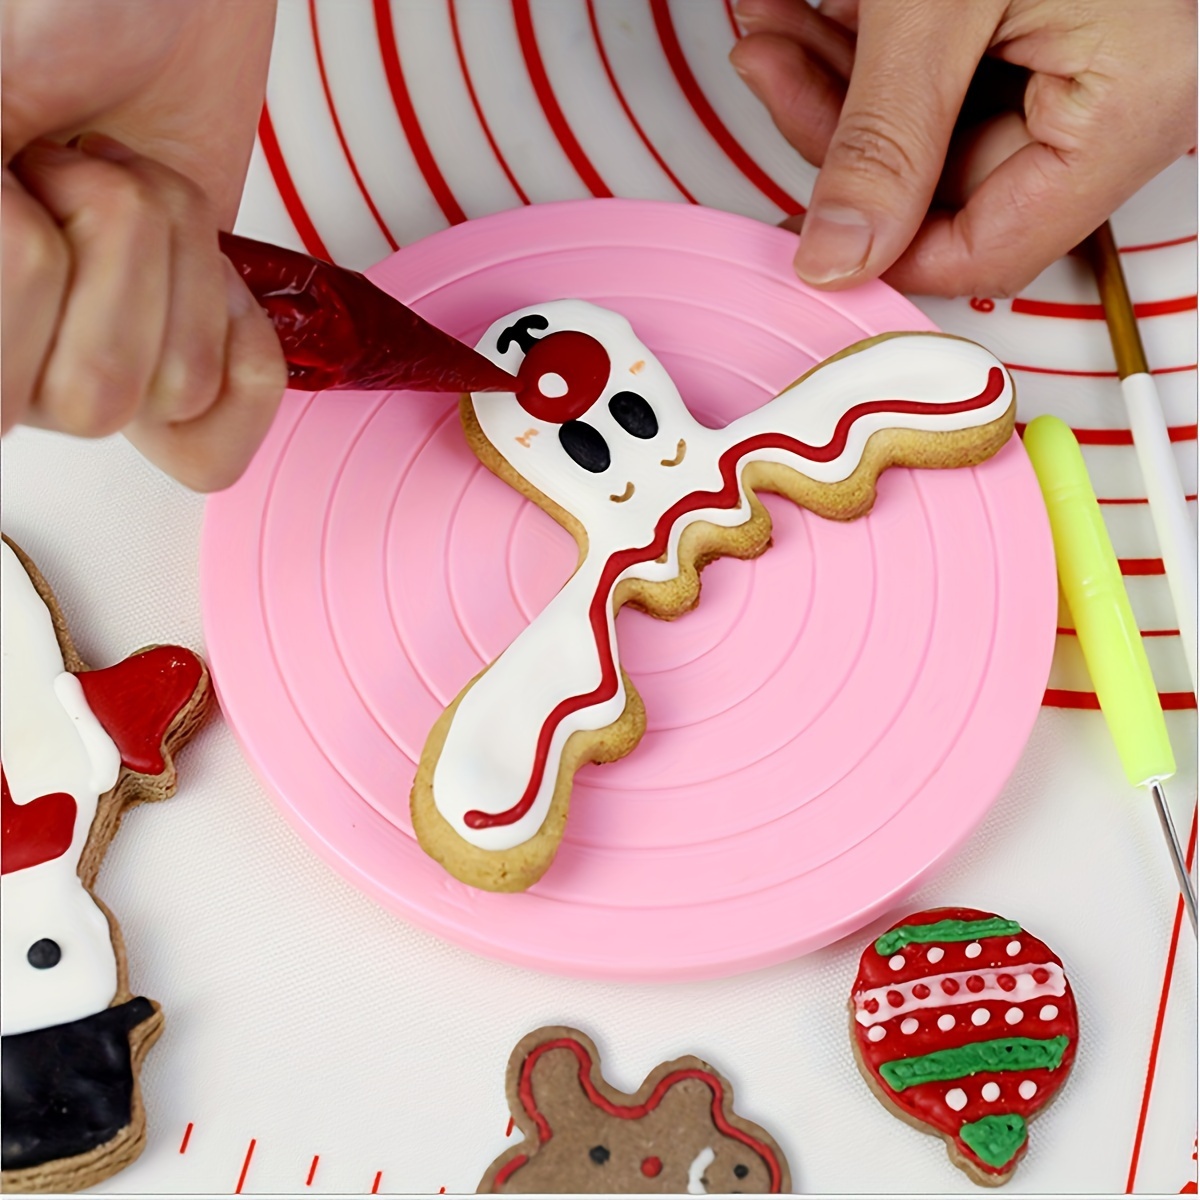 

1pc Easy Control Cake Turntable Stand For Diy Cookie Decorating - 5.5 Inch Turntable For Smooth Spinning And Convenient Decorating